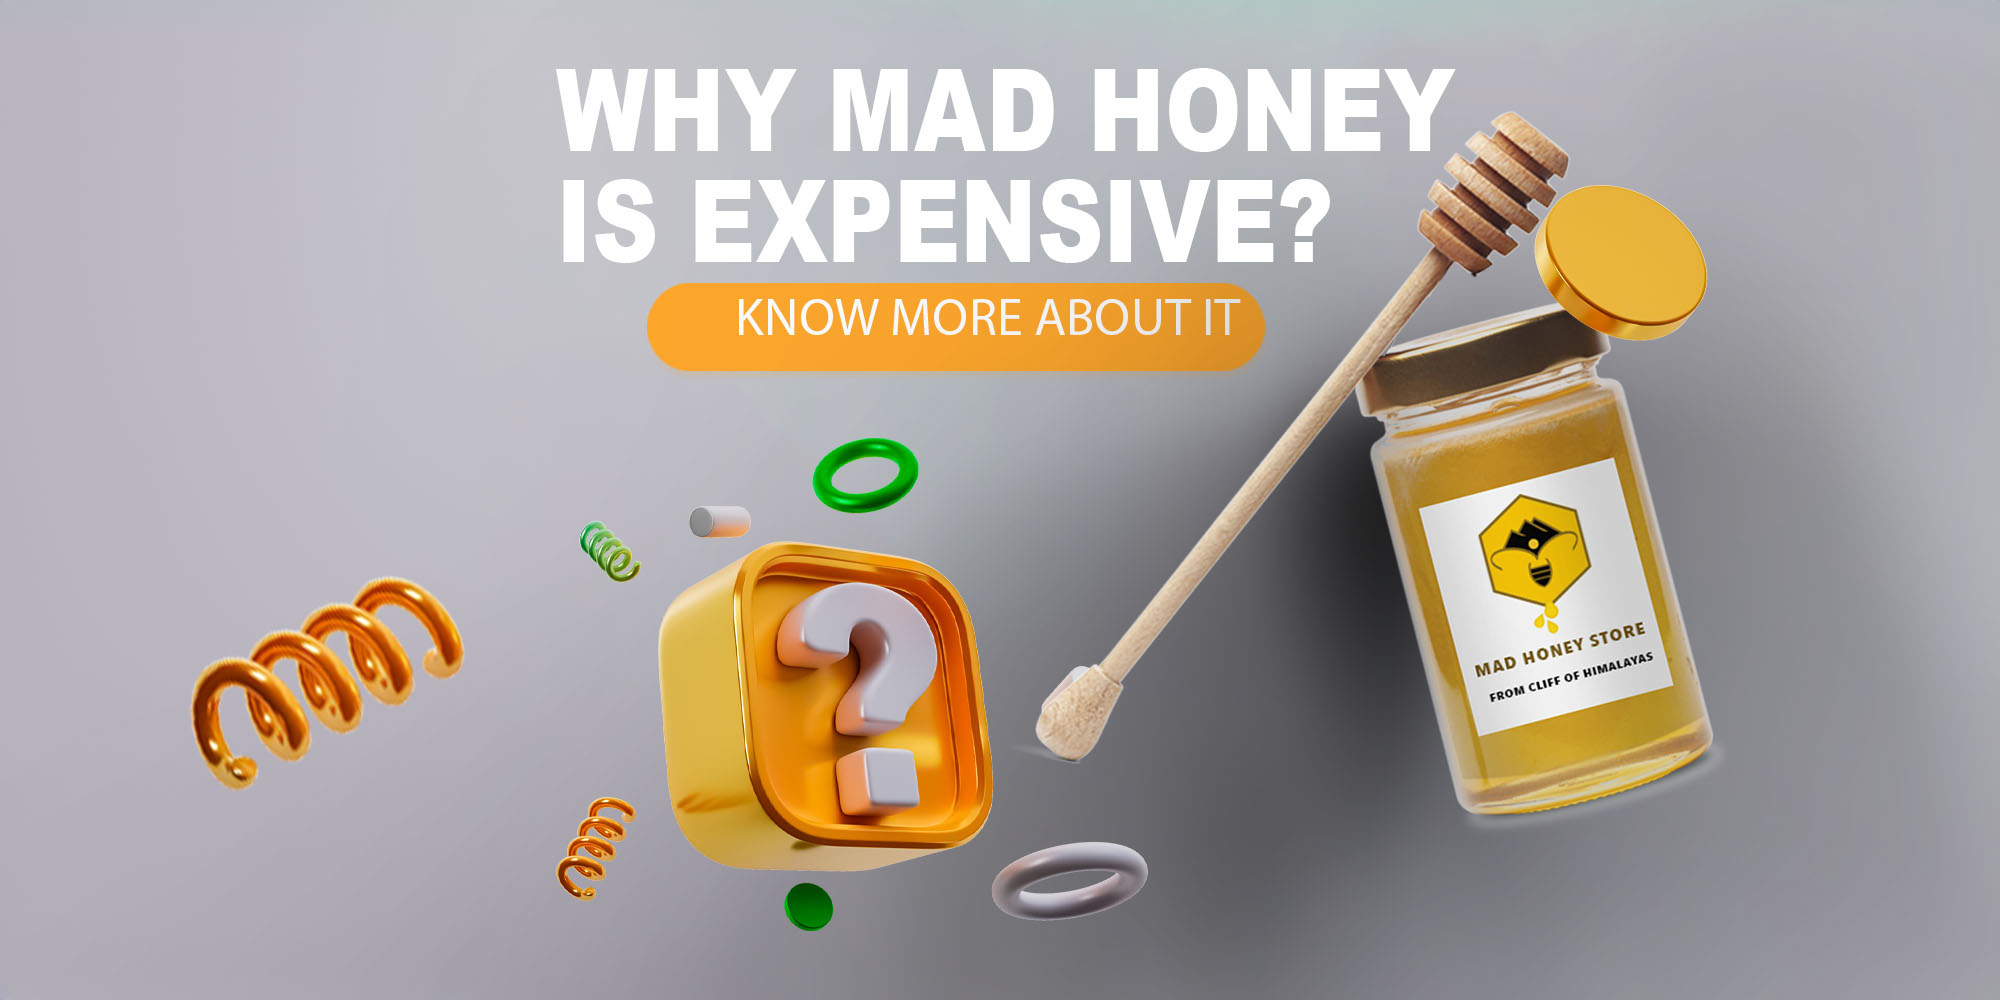 why mad honey is expensive?